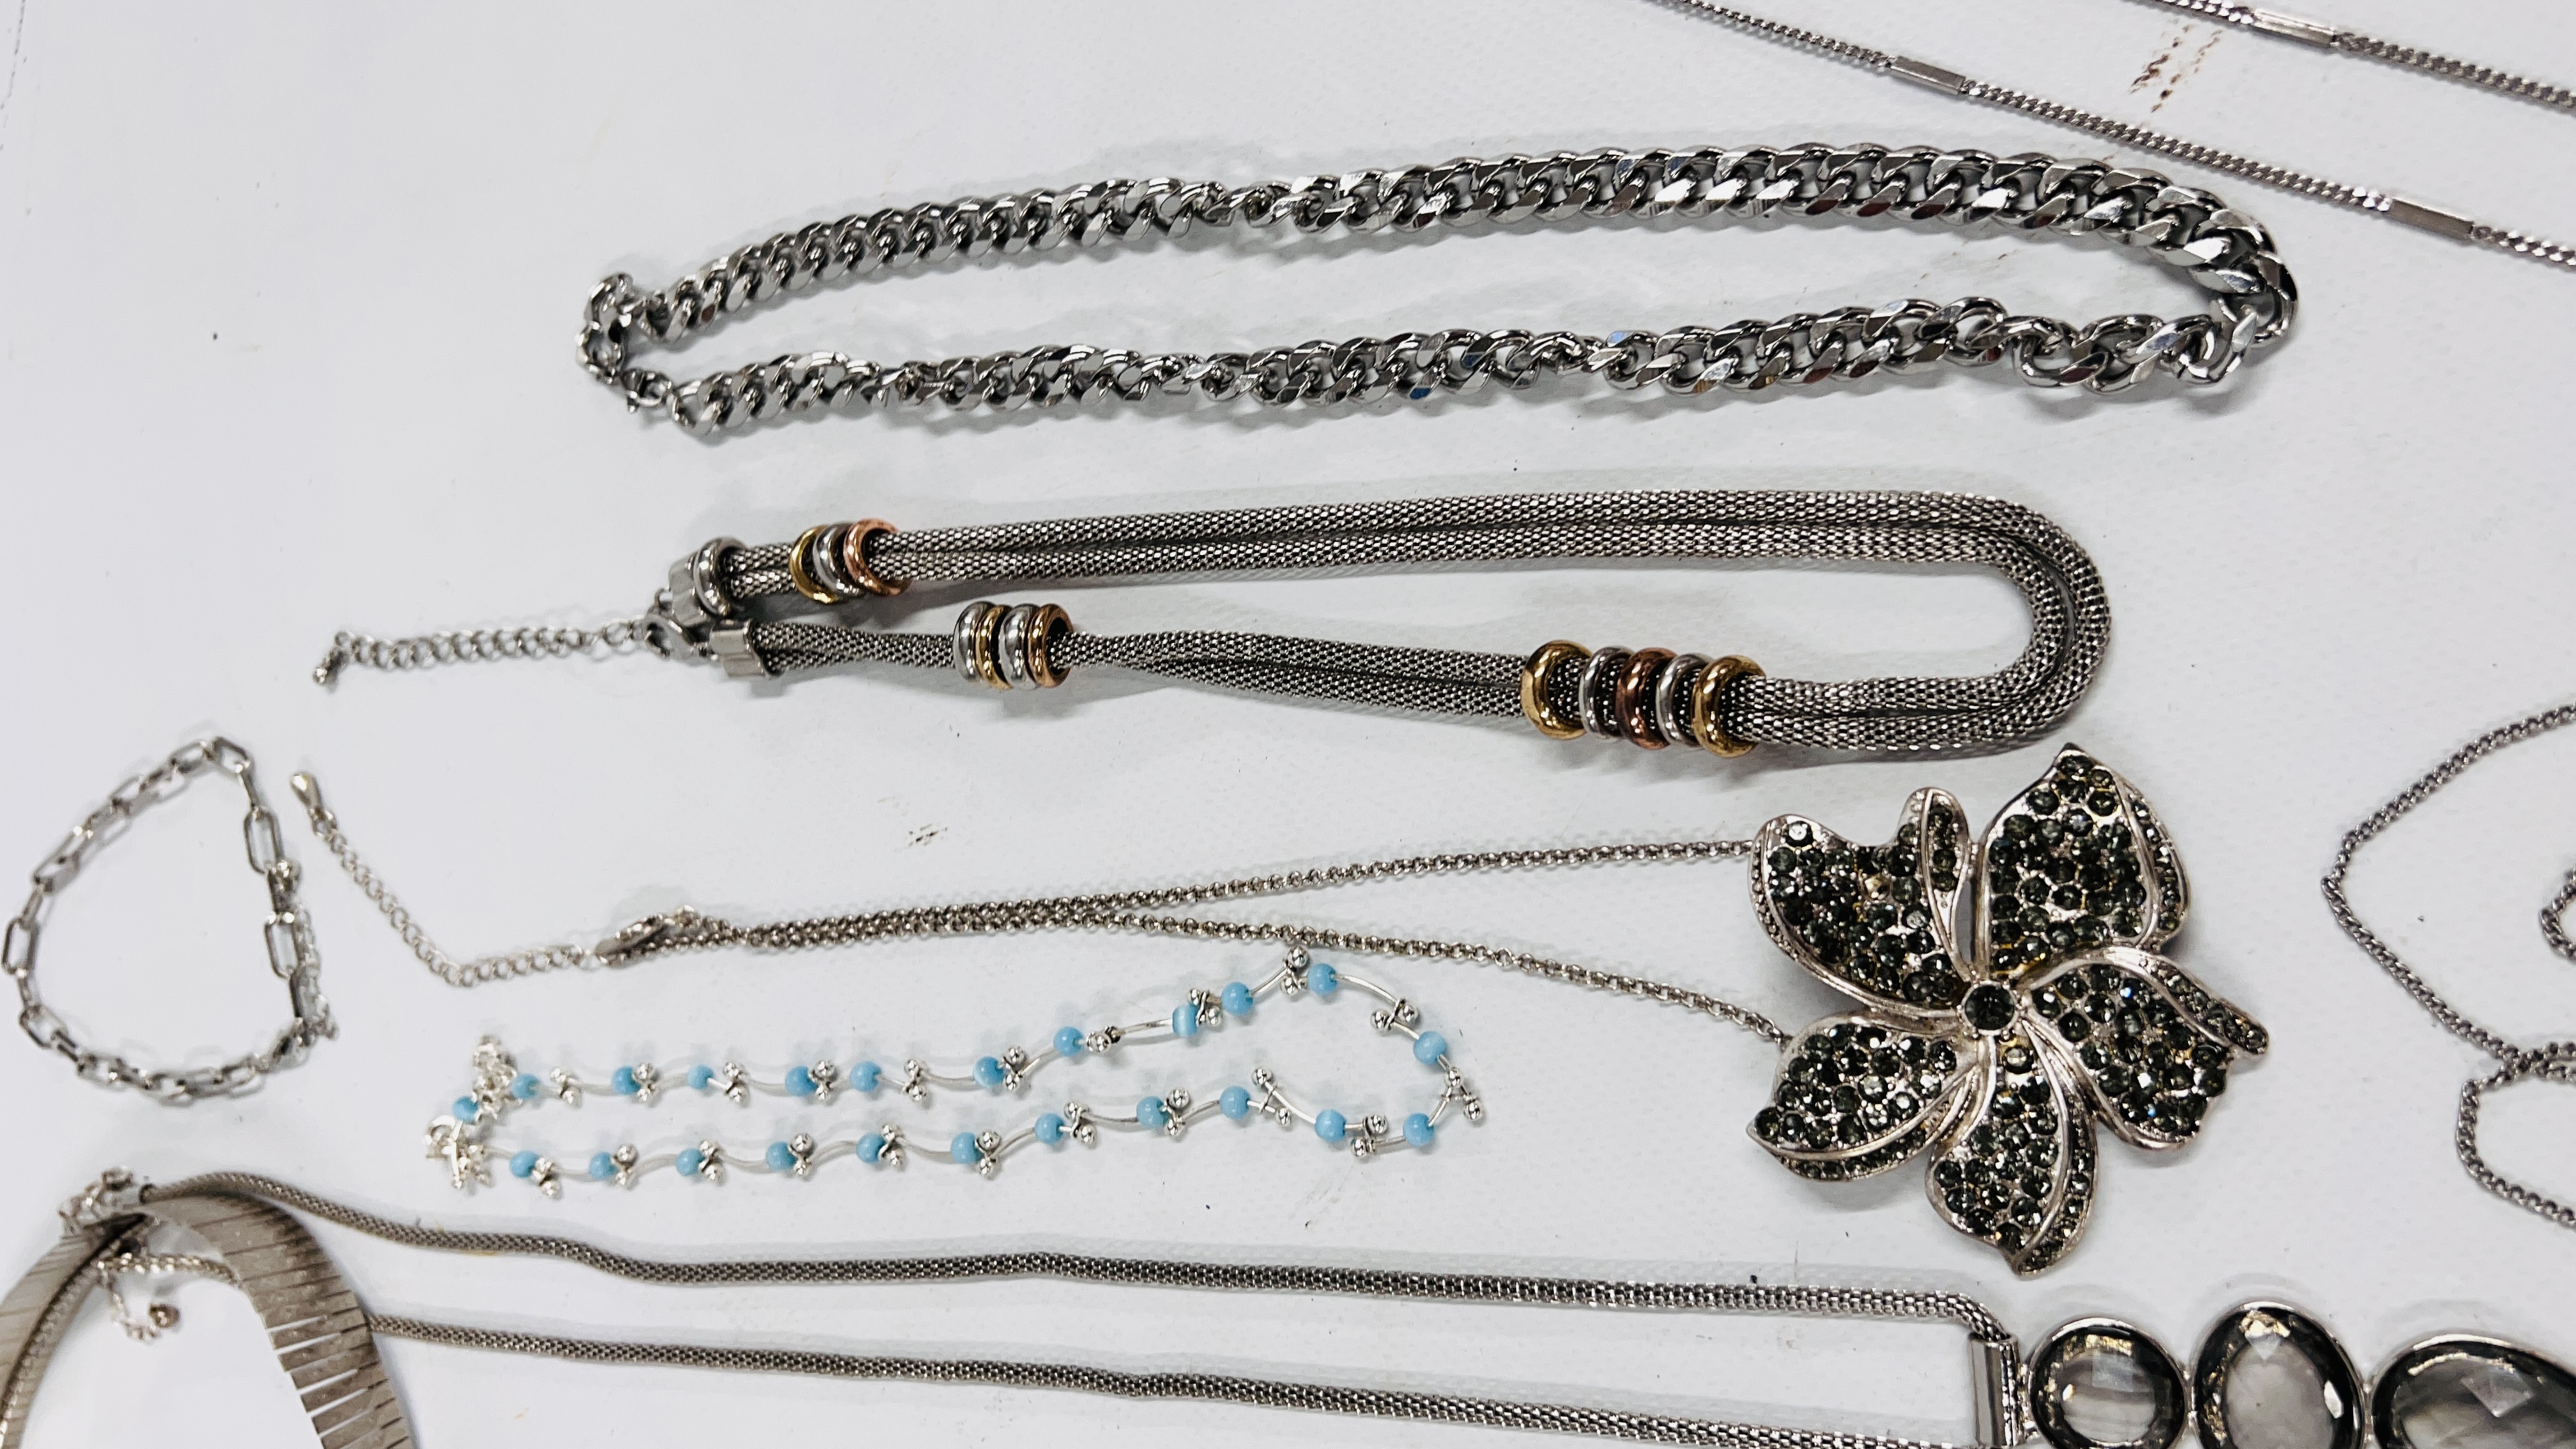 SELECTION OF SILVERTONE COSTUME JEWELLERY ALONG WITH A JEWELLERY BOX FULL OF BEADED NECKLACES. - Image 3 of 12